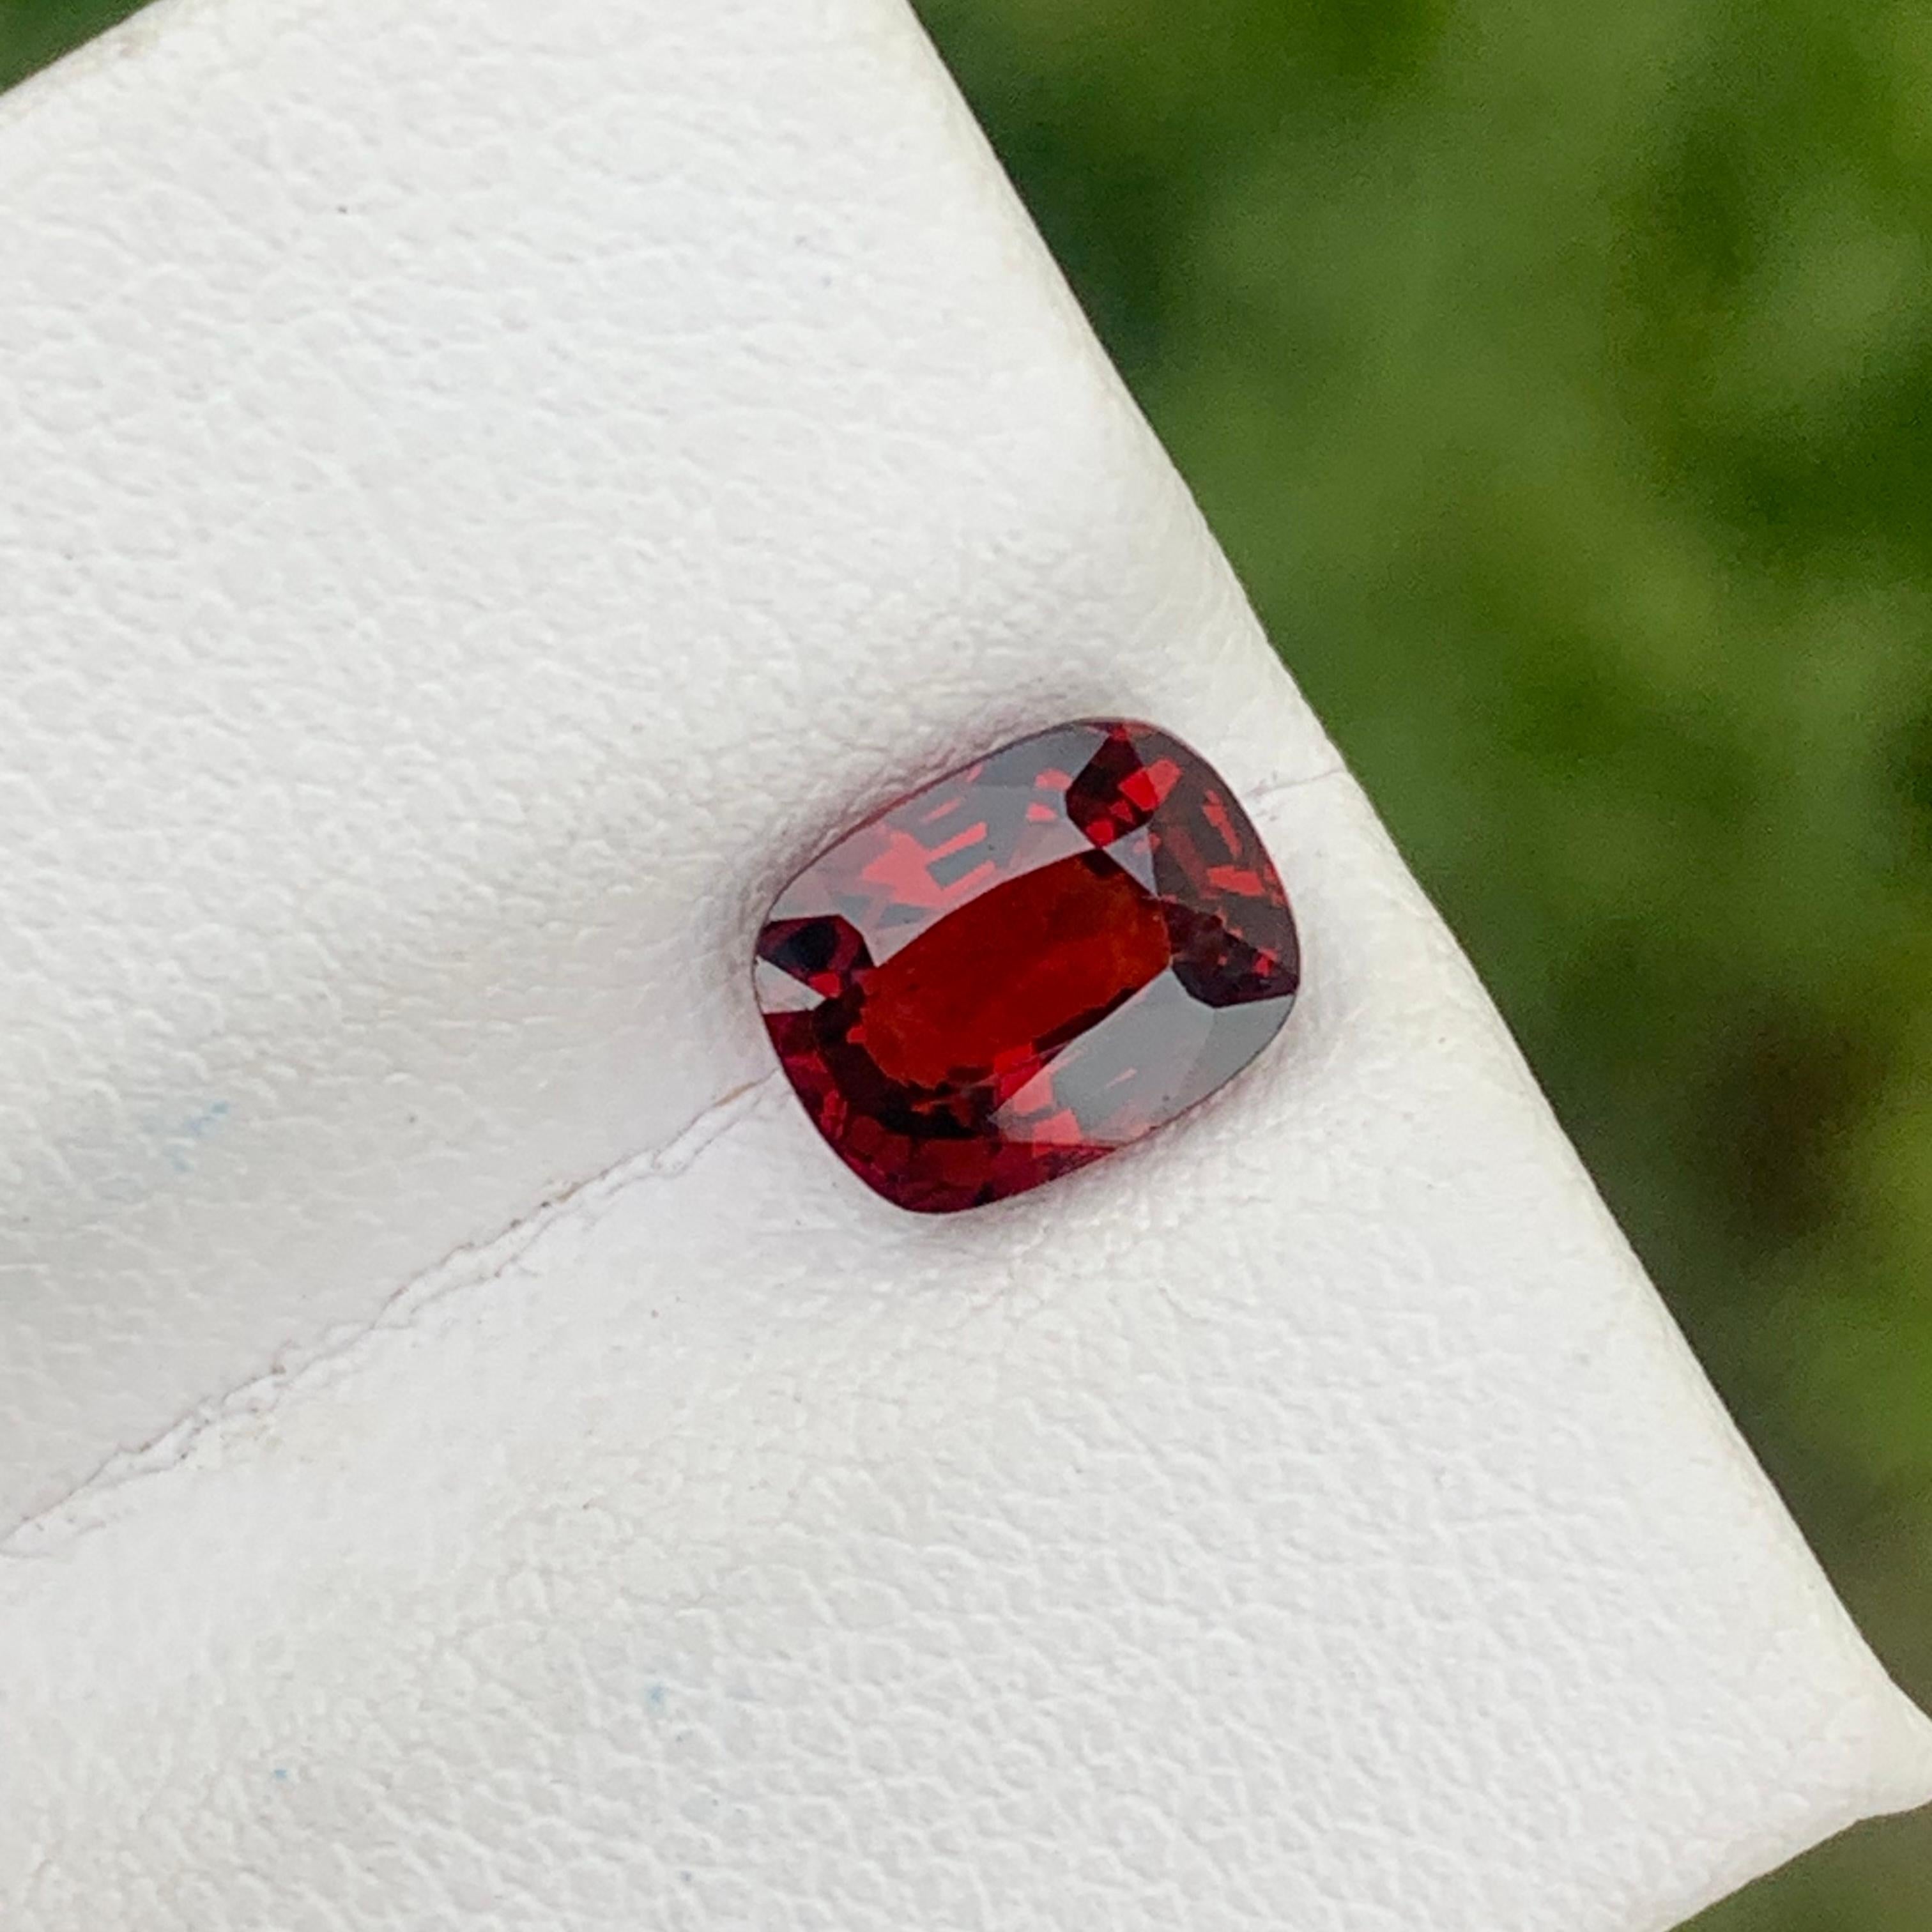 Women's or Men's Beautiful 1.45 Carat Natural Loose Red Spinel From Burma Myanmar Cushion Shape For Sale